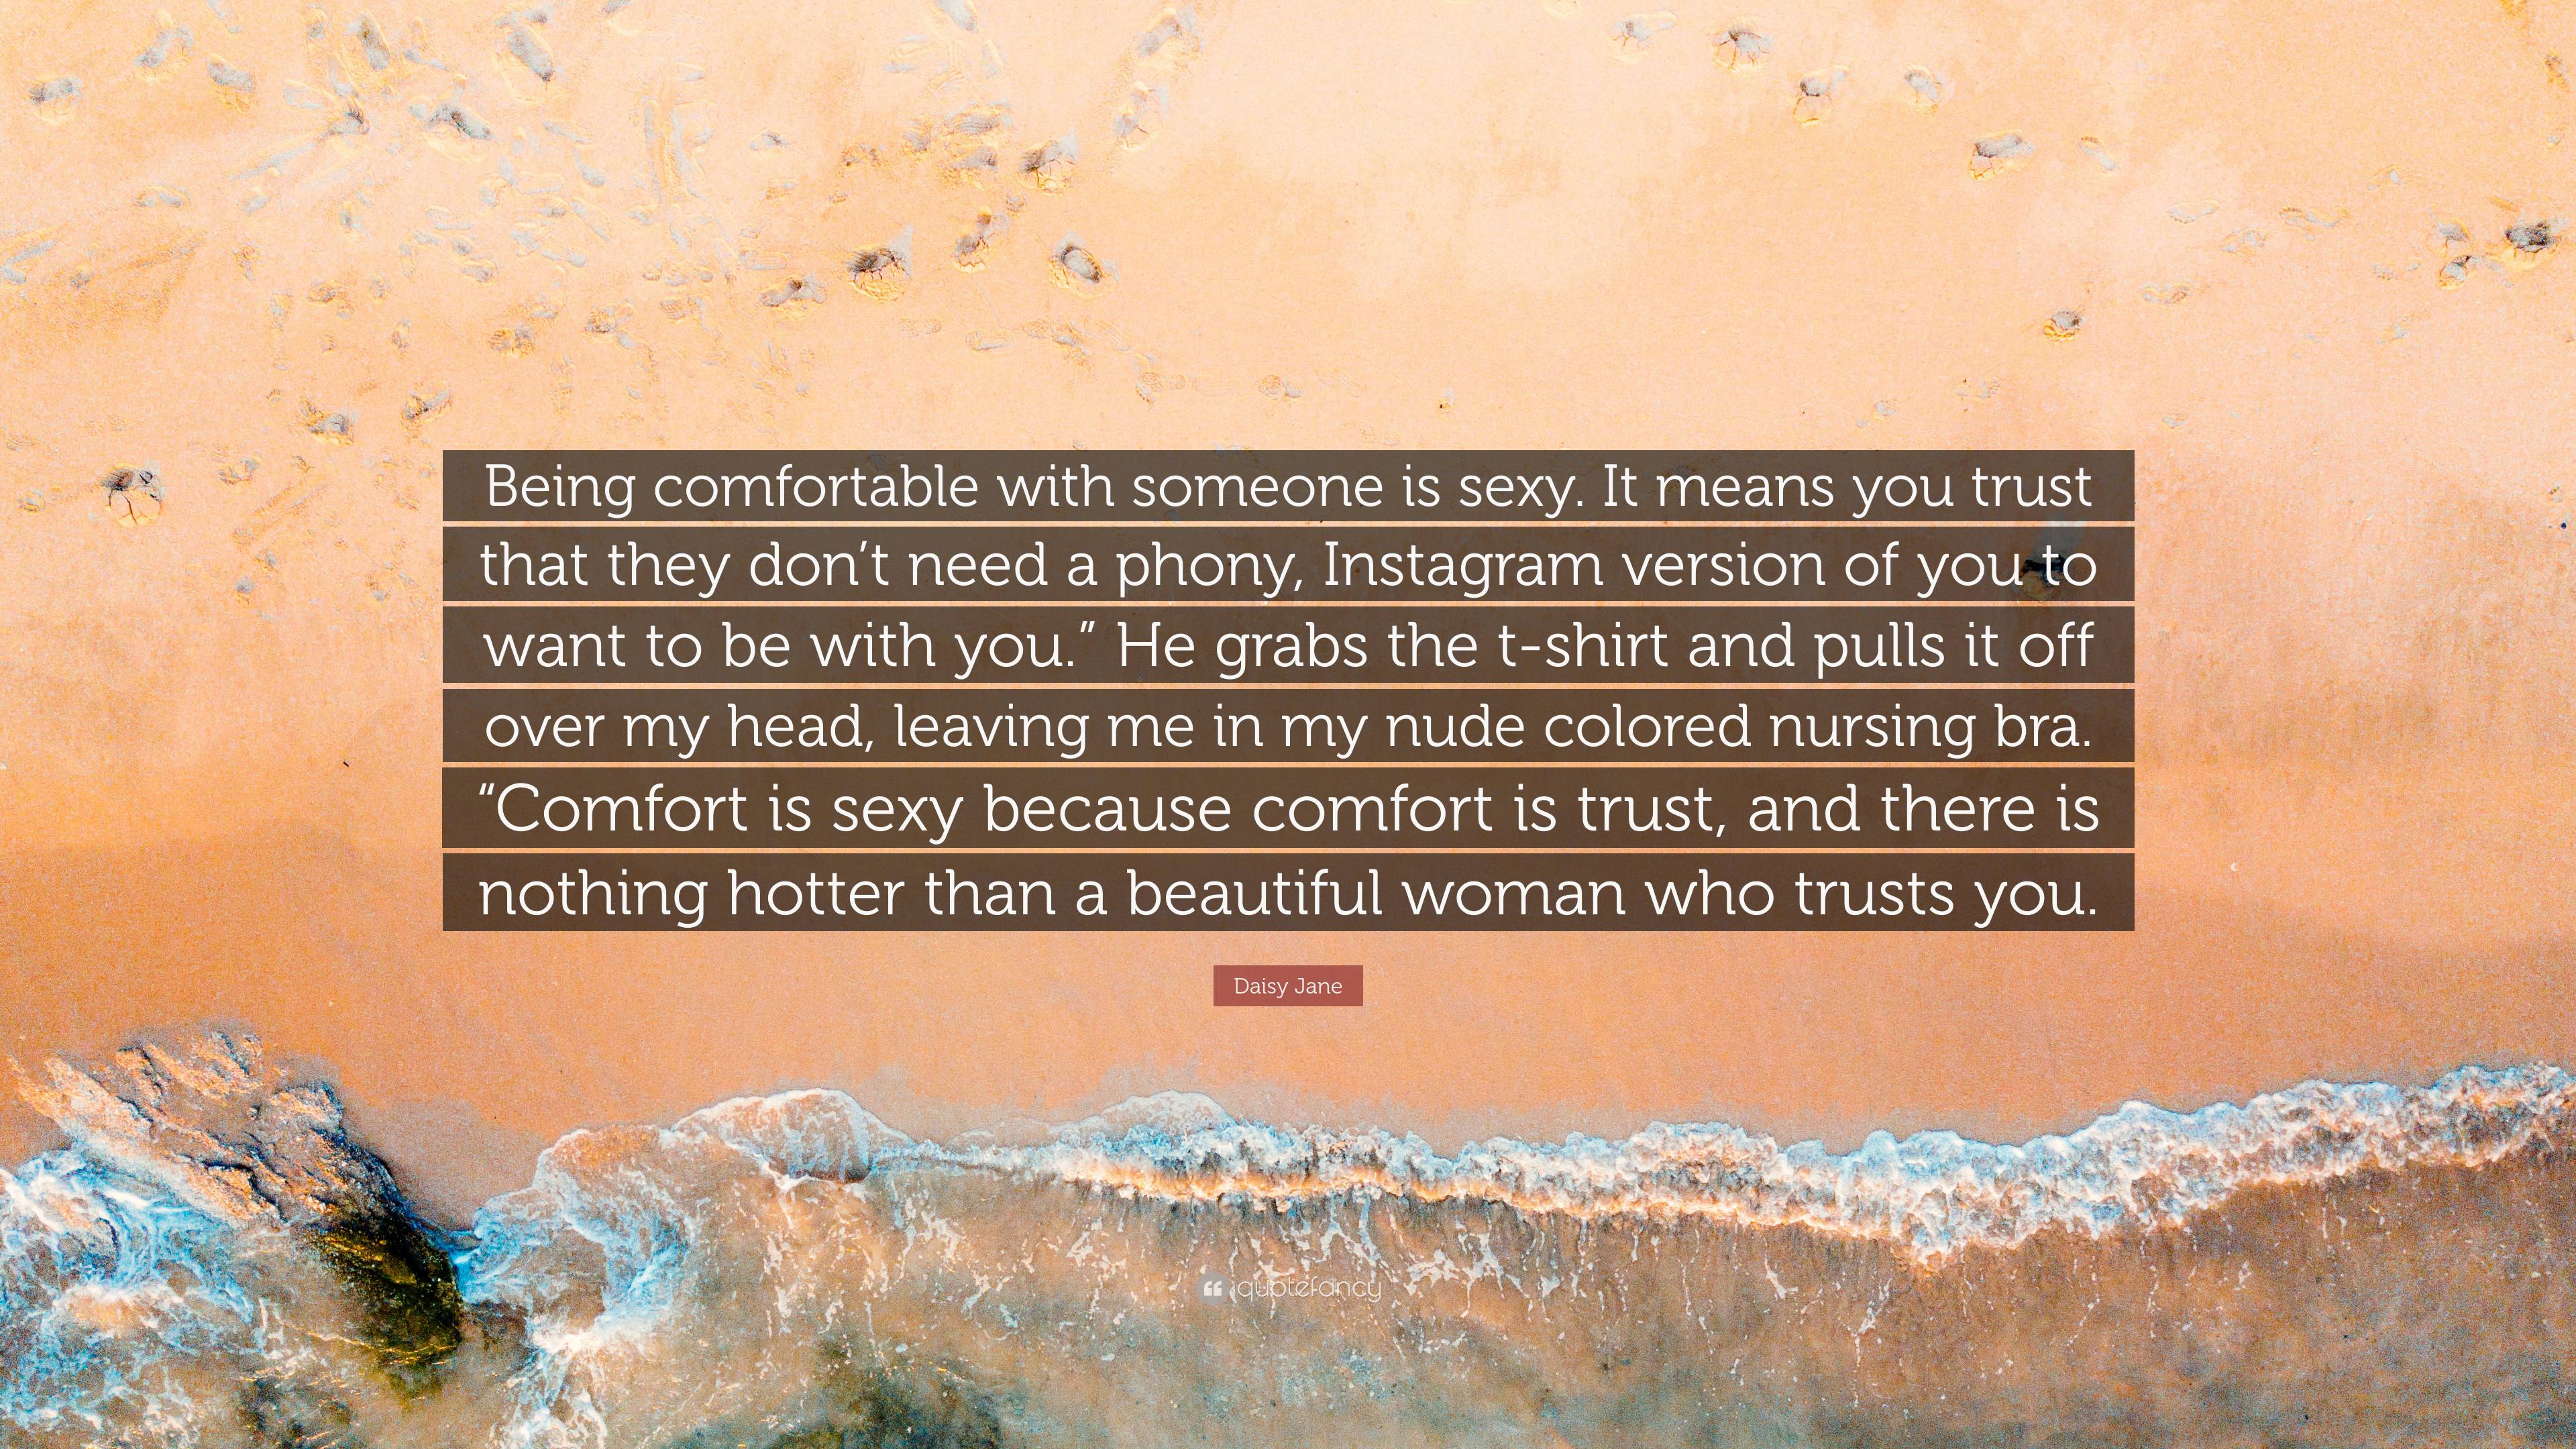 Daisy Jane Quote: “Being comfortable with someone is sexy. It means you  trust that they don't need a phony, Instagram version of you to wan”